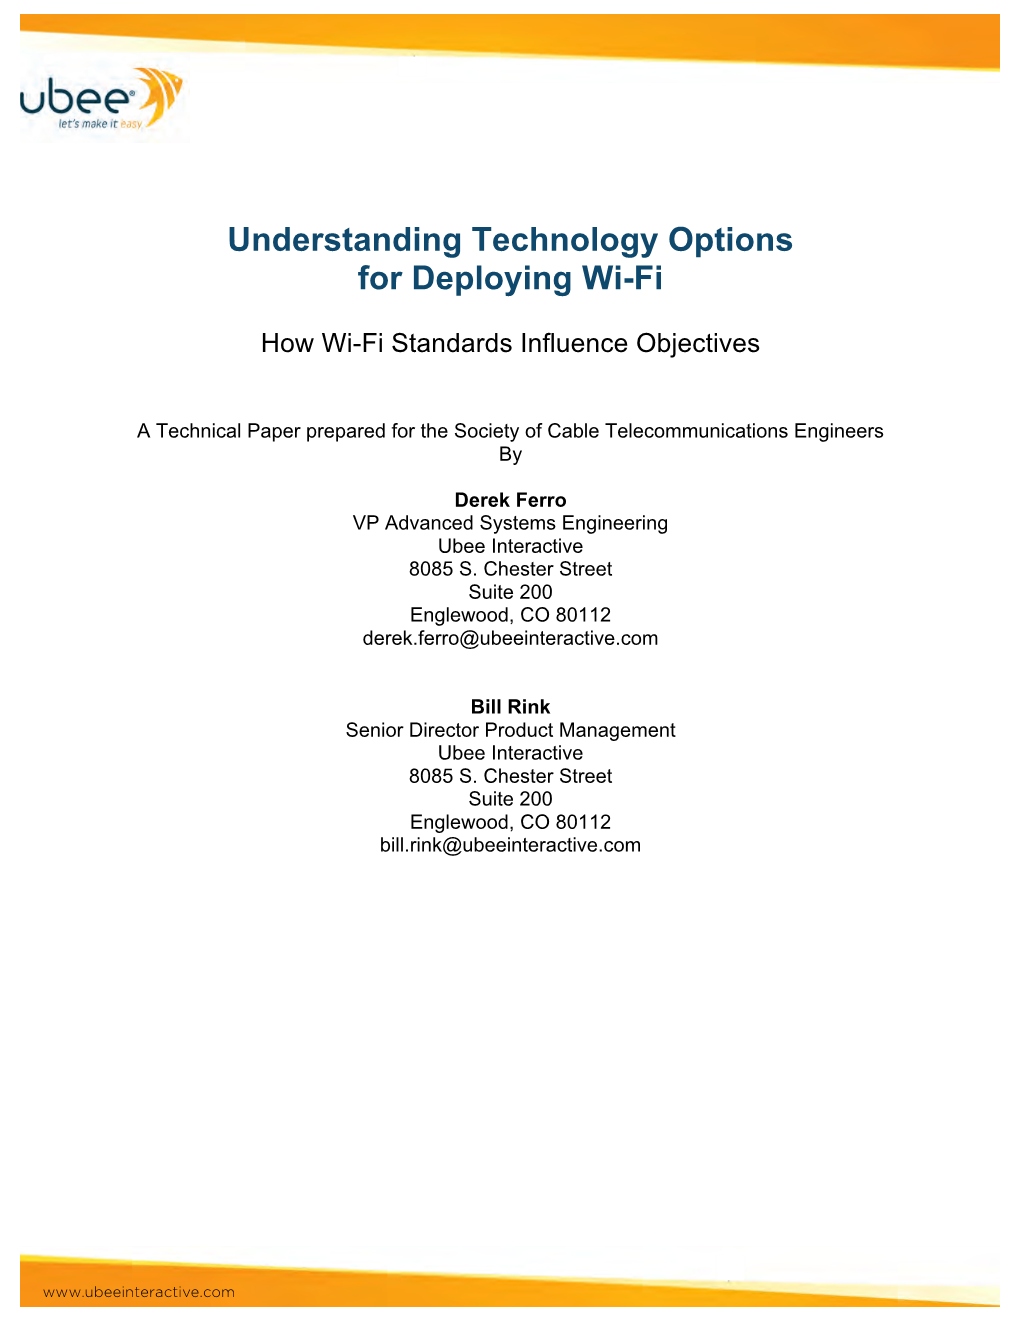 Understanding Technology Options for Deploying Wi-Fi